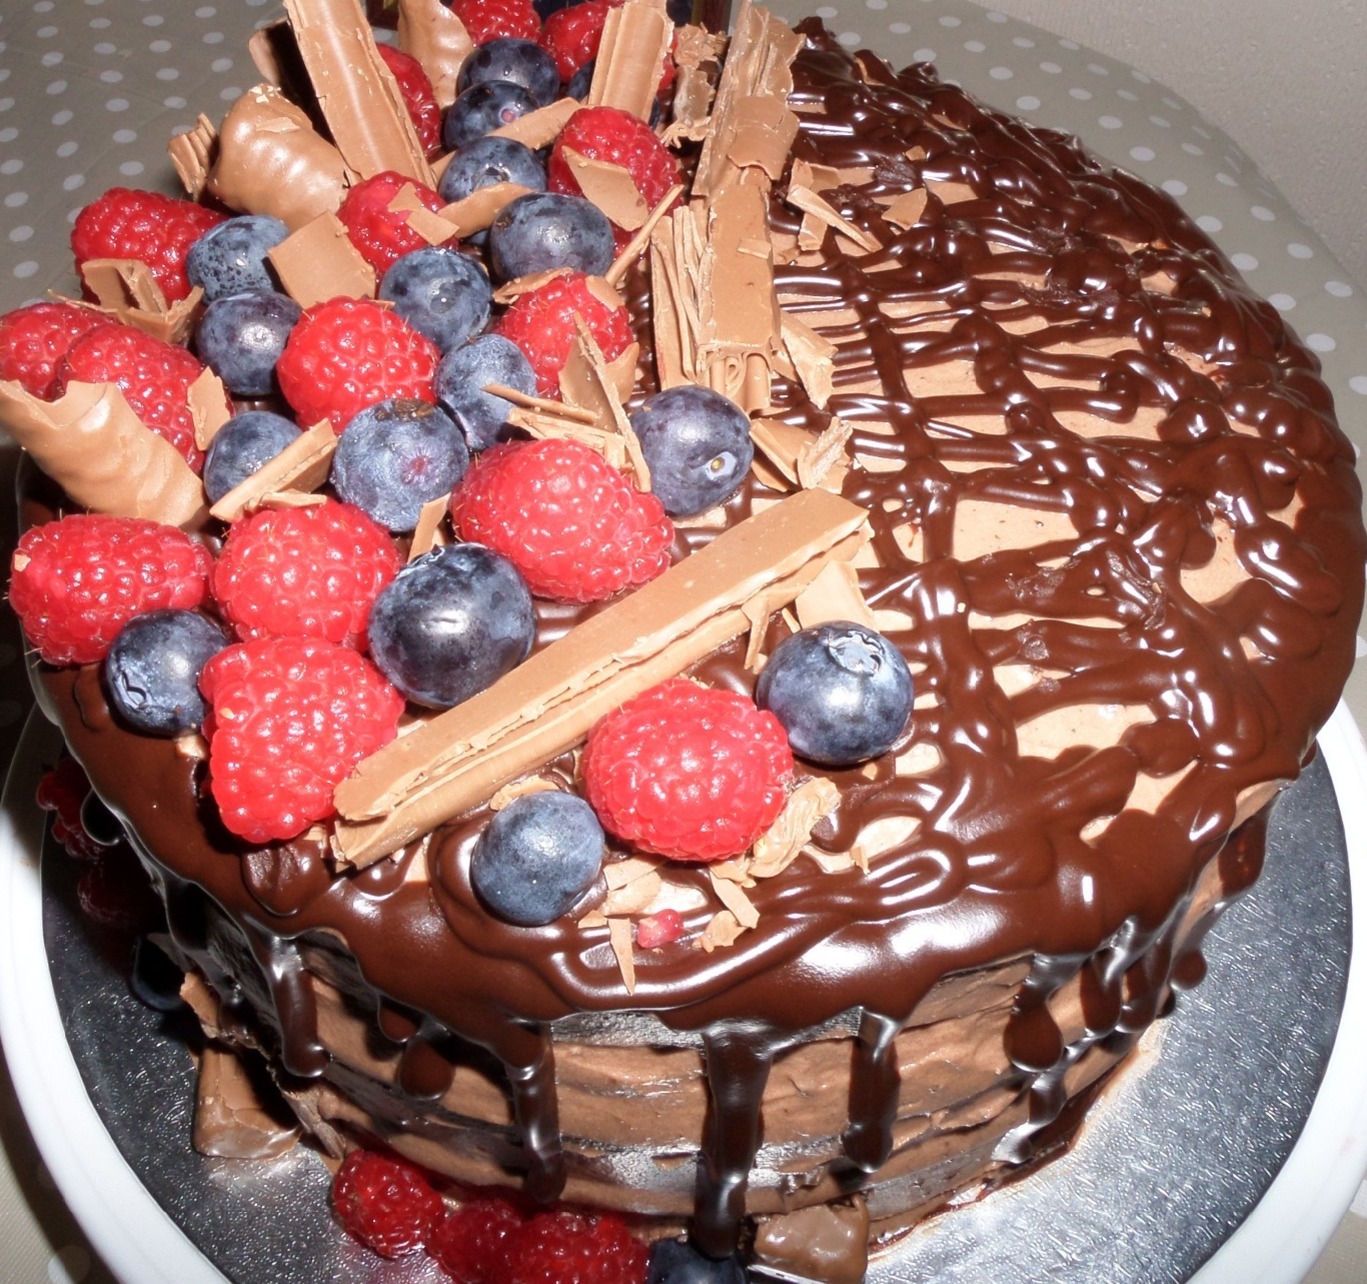 chocolate and fruit gateaux style